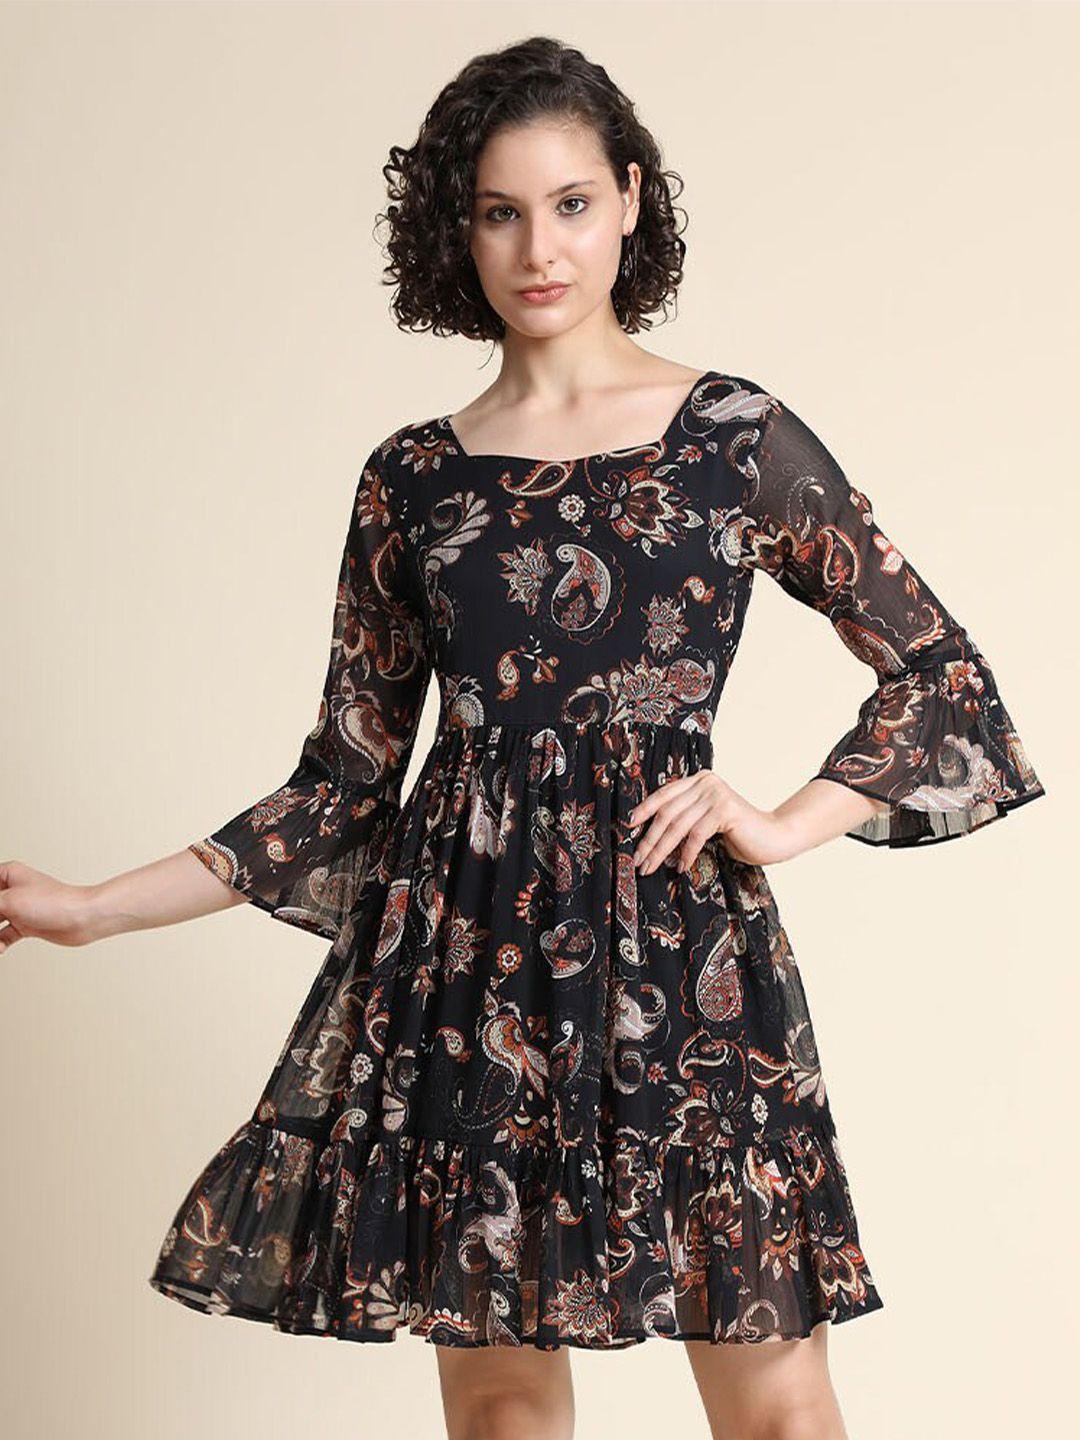 BAESD Black Floral Print Bell Sleeve Fit & Flare Dress